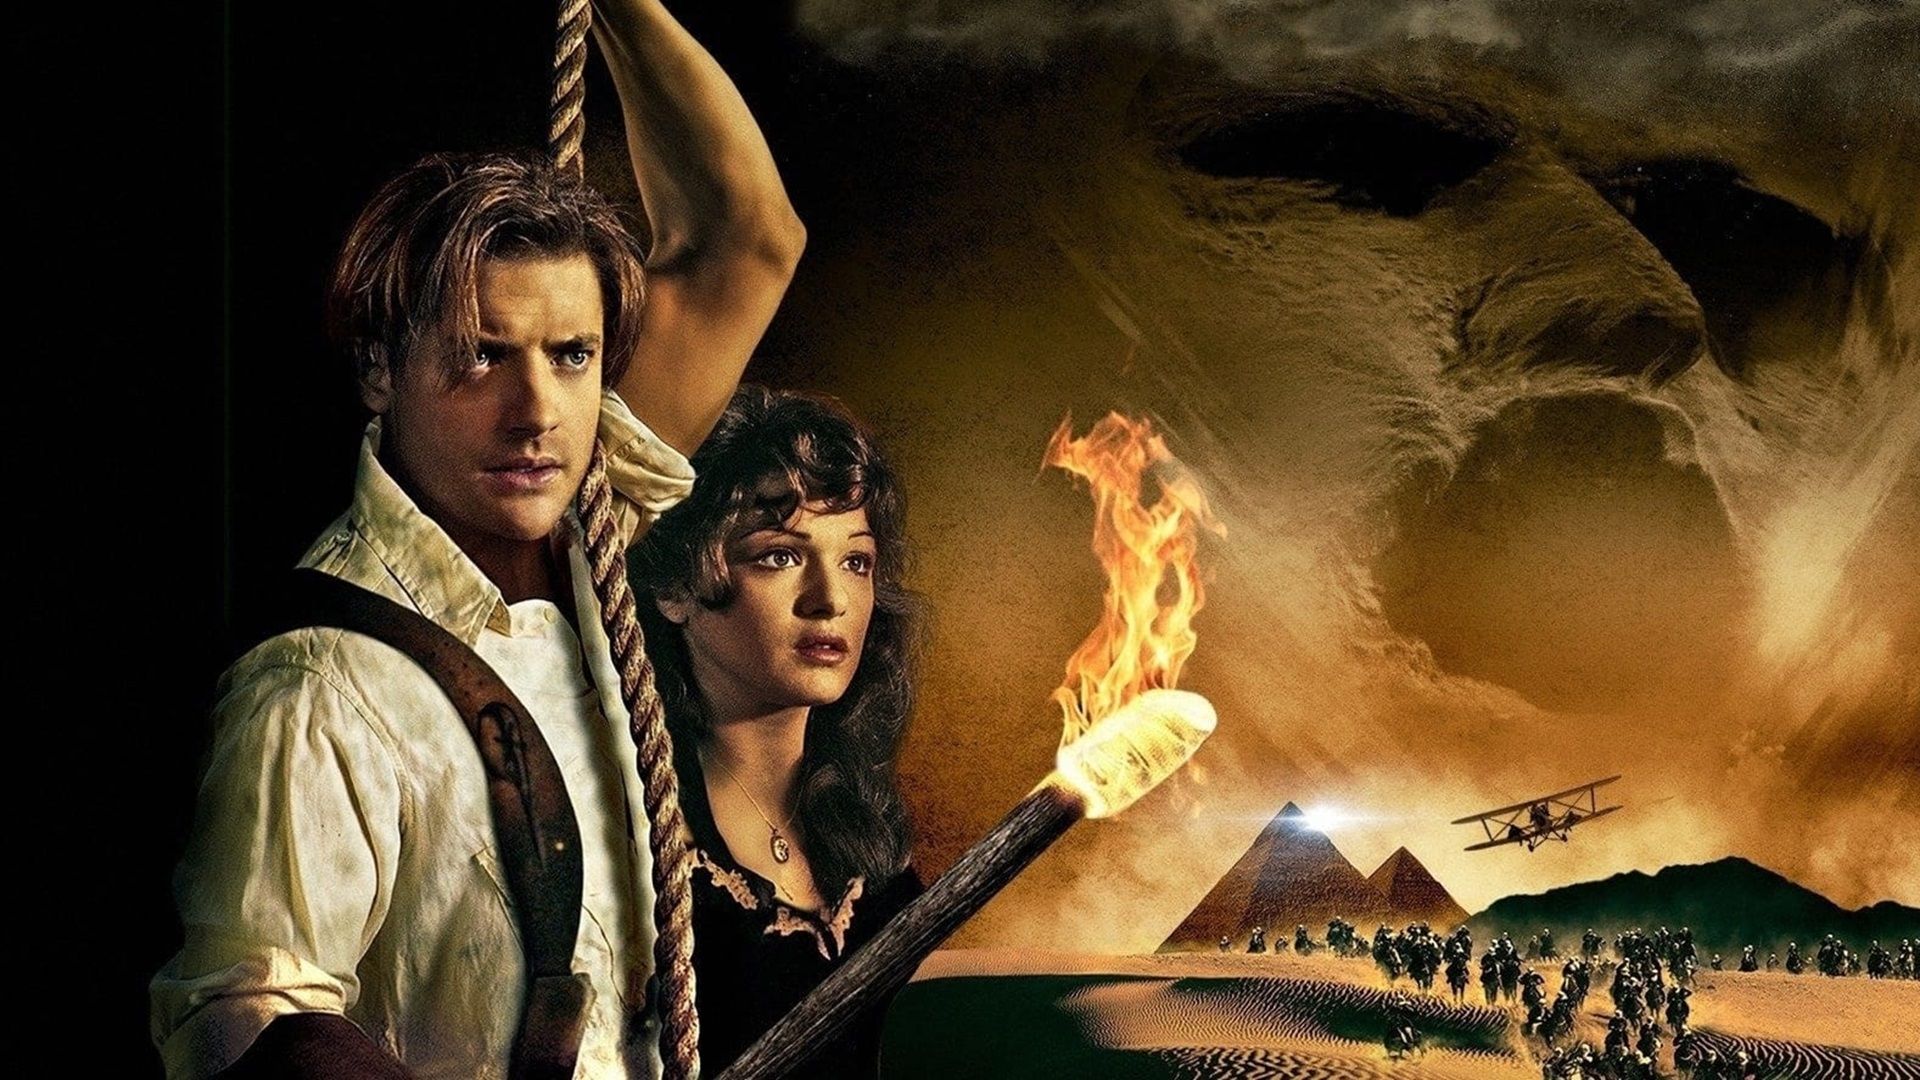 The Mummy 25th Anniversary Re-Release Wins Big at the Box Office